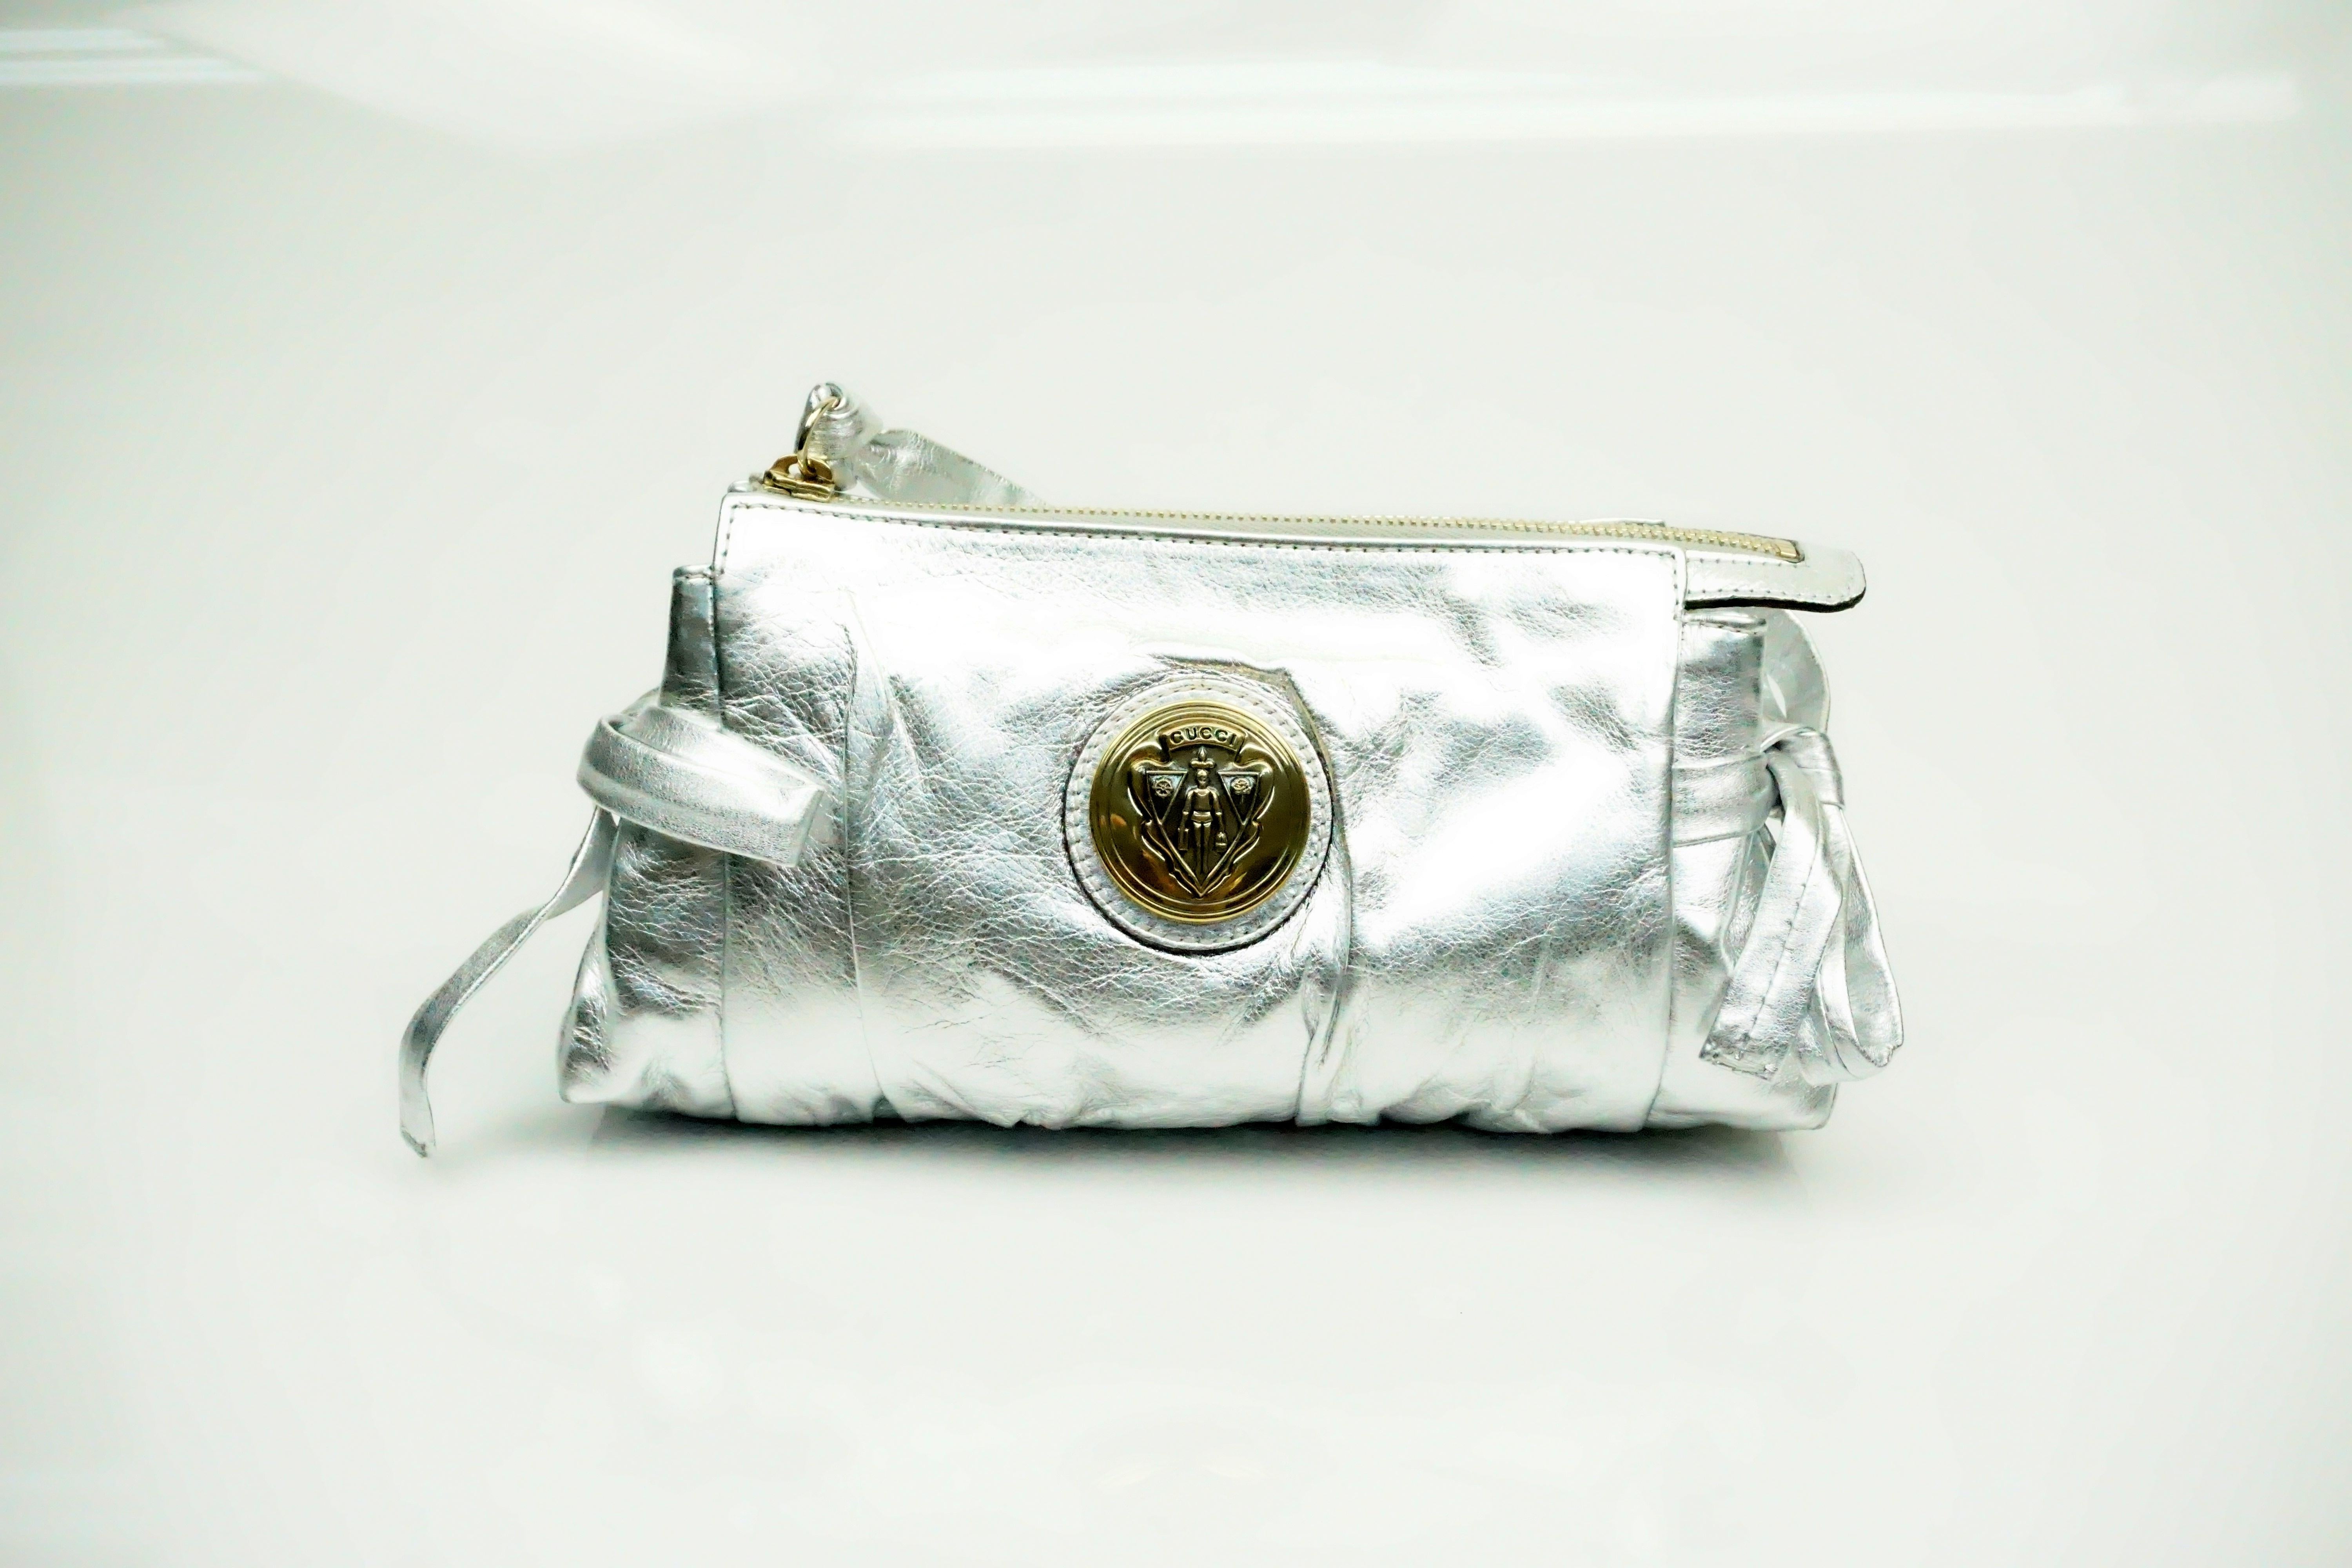 Gucci Silver Metallic Leather Clutch  This beautifulclutch is in excellent condition. The bag has two bows on the sides of the clutch. The zipper is a gold tone and has a wrist strap attached to it. There is also a gold Gucci logo on the center